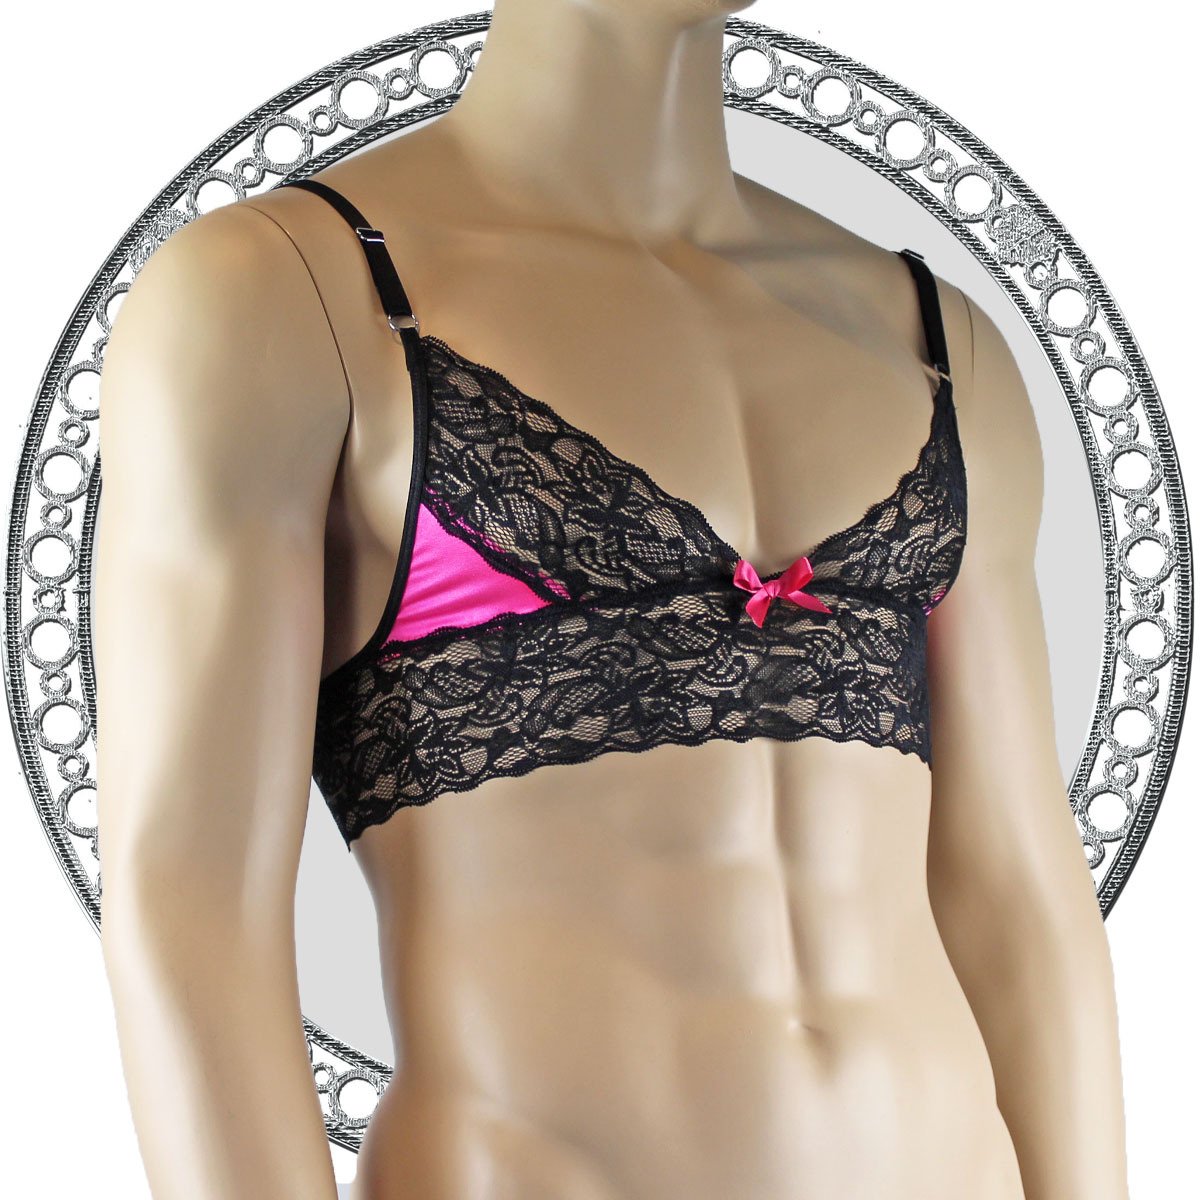 Mens Lace Bra Top Lingerie for Men Hot Pink and Black